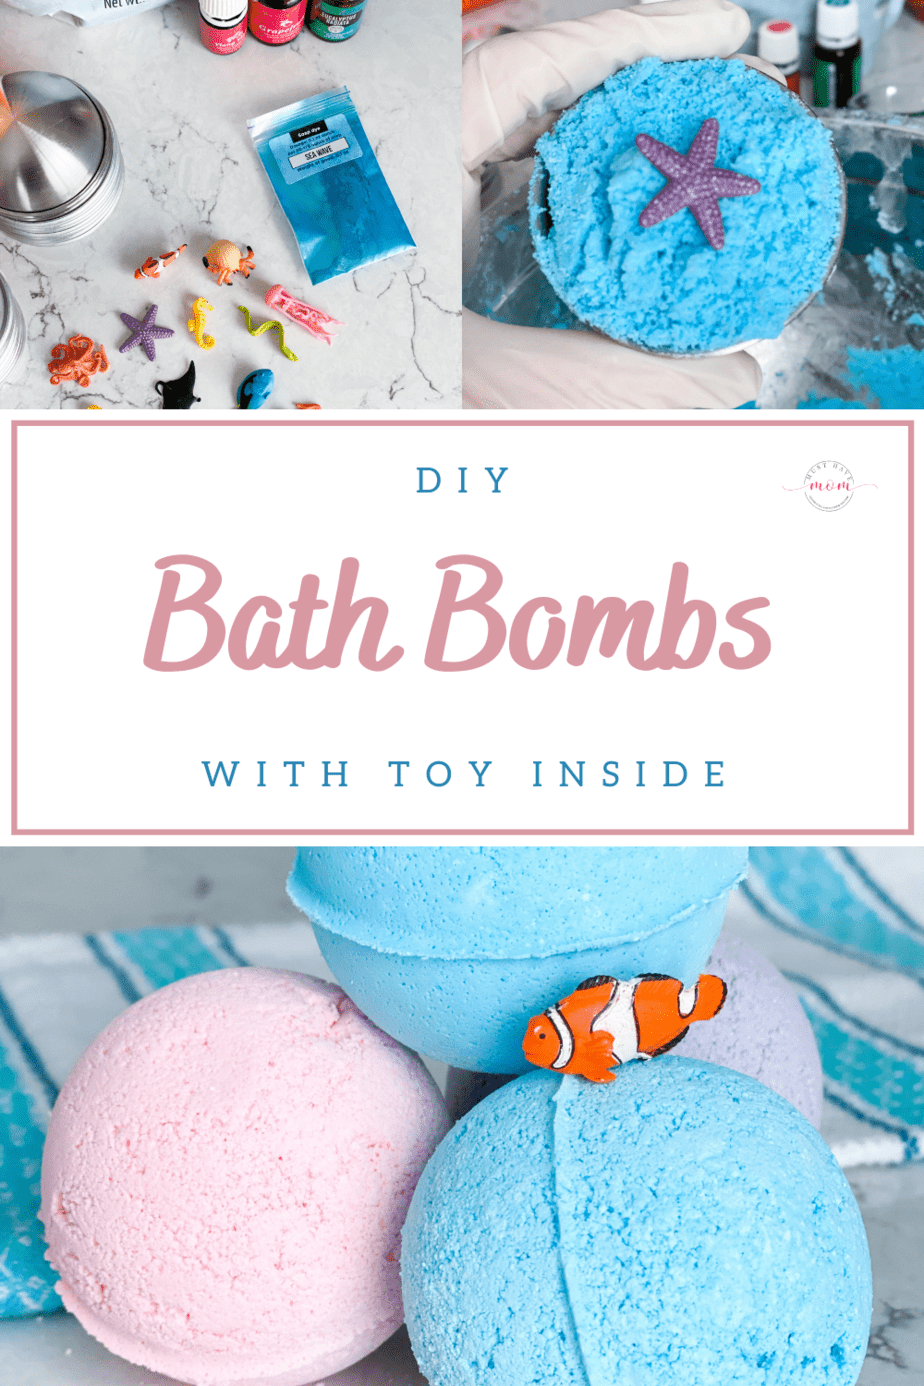 The best bath bombs with a toy inside use all-natural ingredients! These fizz beautifully in the bathtub and make your skin feel silky soft. #musthavemom #bathbombs #diy #crafts 